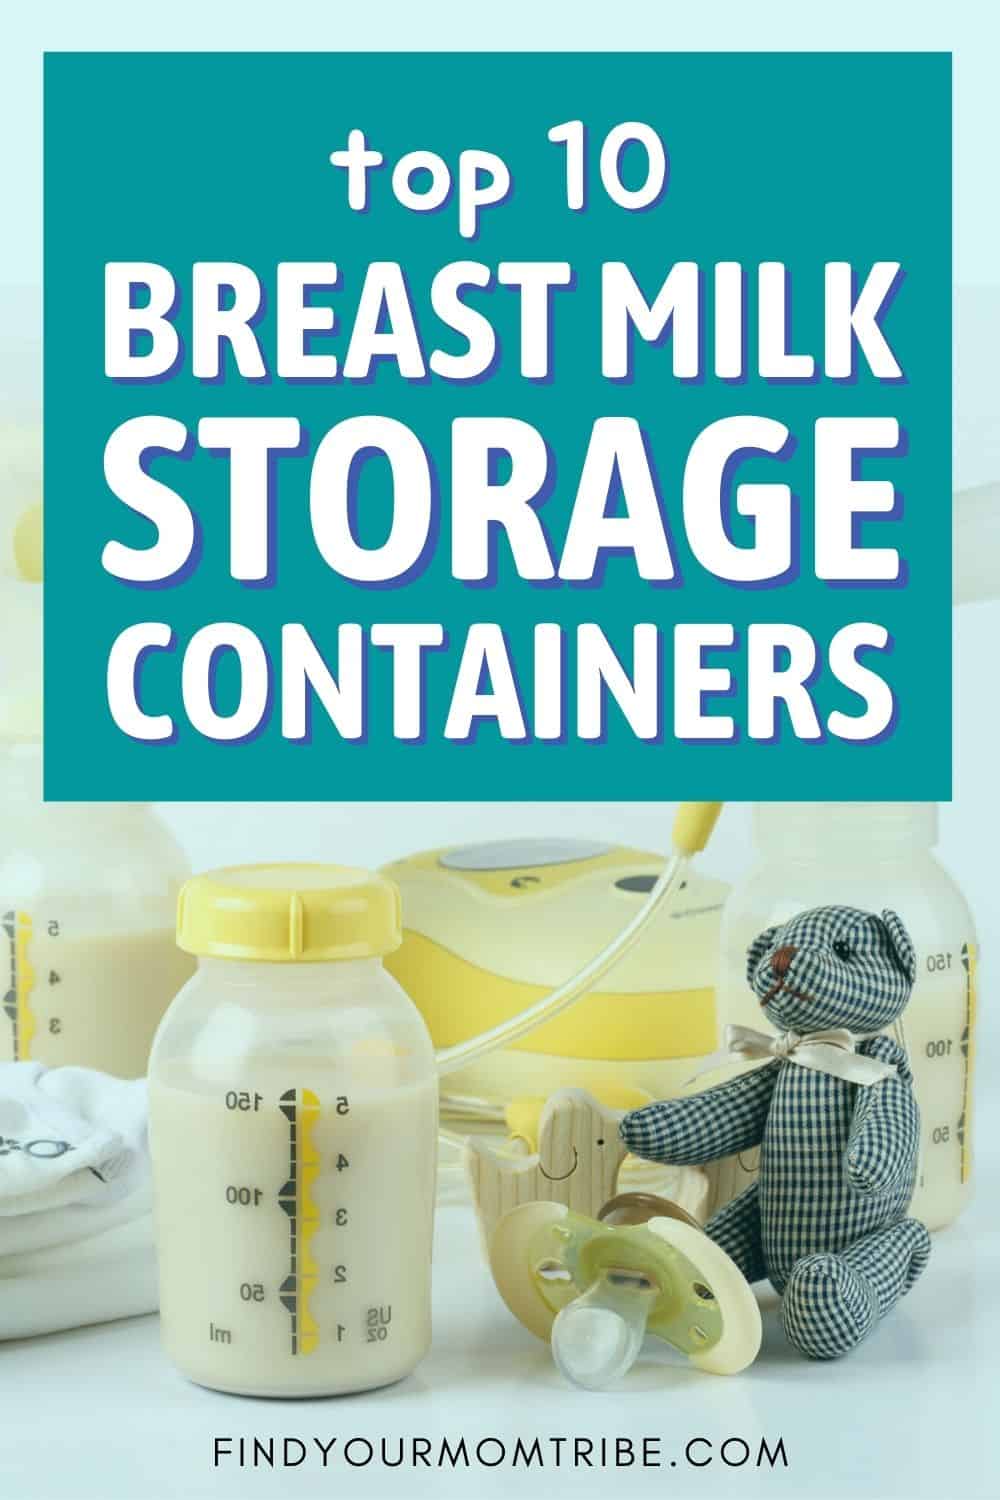 Top 10 Breast Milk Storage Containers